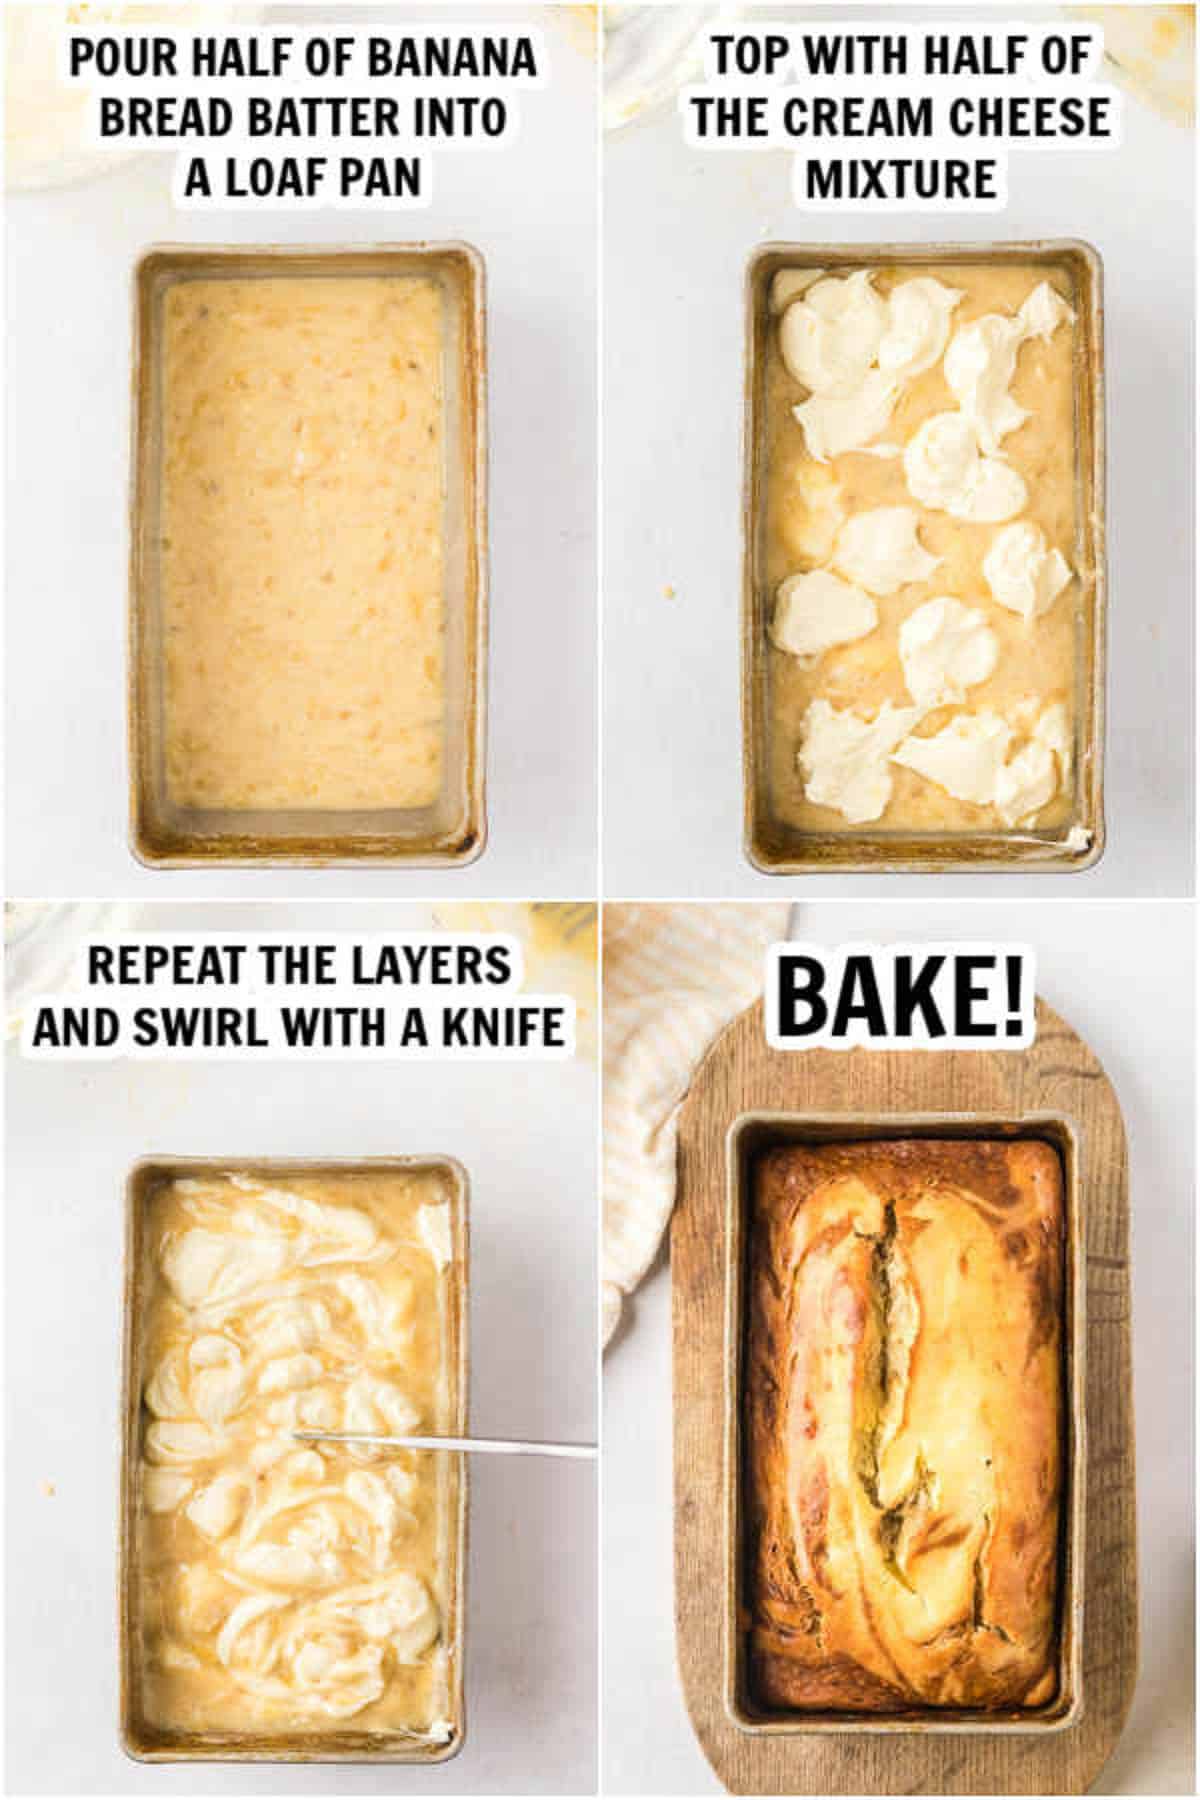 4 photos: bread batter into a loaf pan, adding cream cheese mixture, repeat the layers and swirl with a knife and bake. 